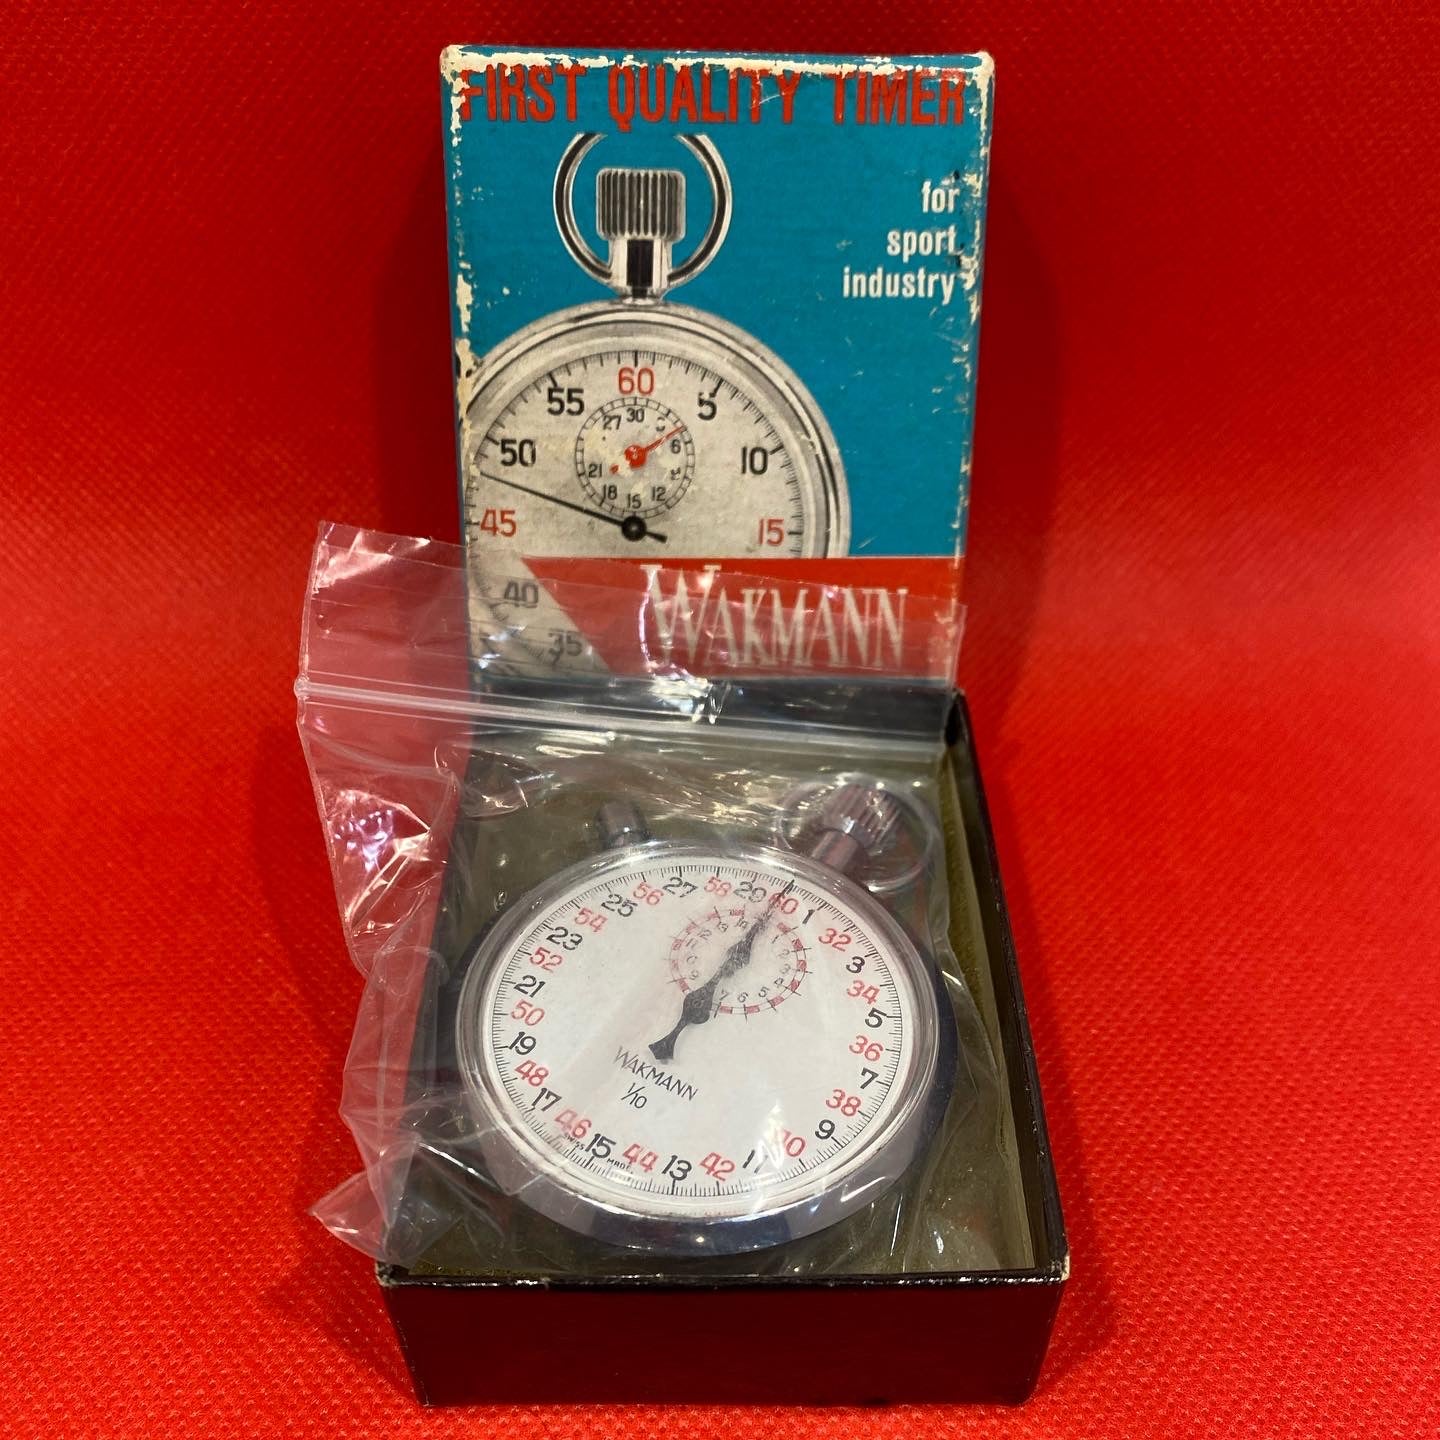 Rare Vintage Swiss made Breitling Wakmann 1/10 stop watch. New with original box. Works fine.